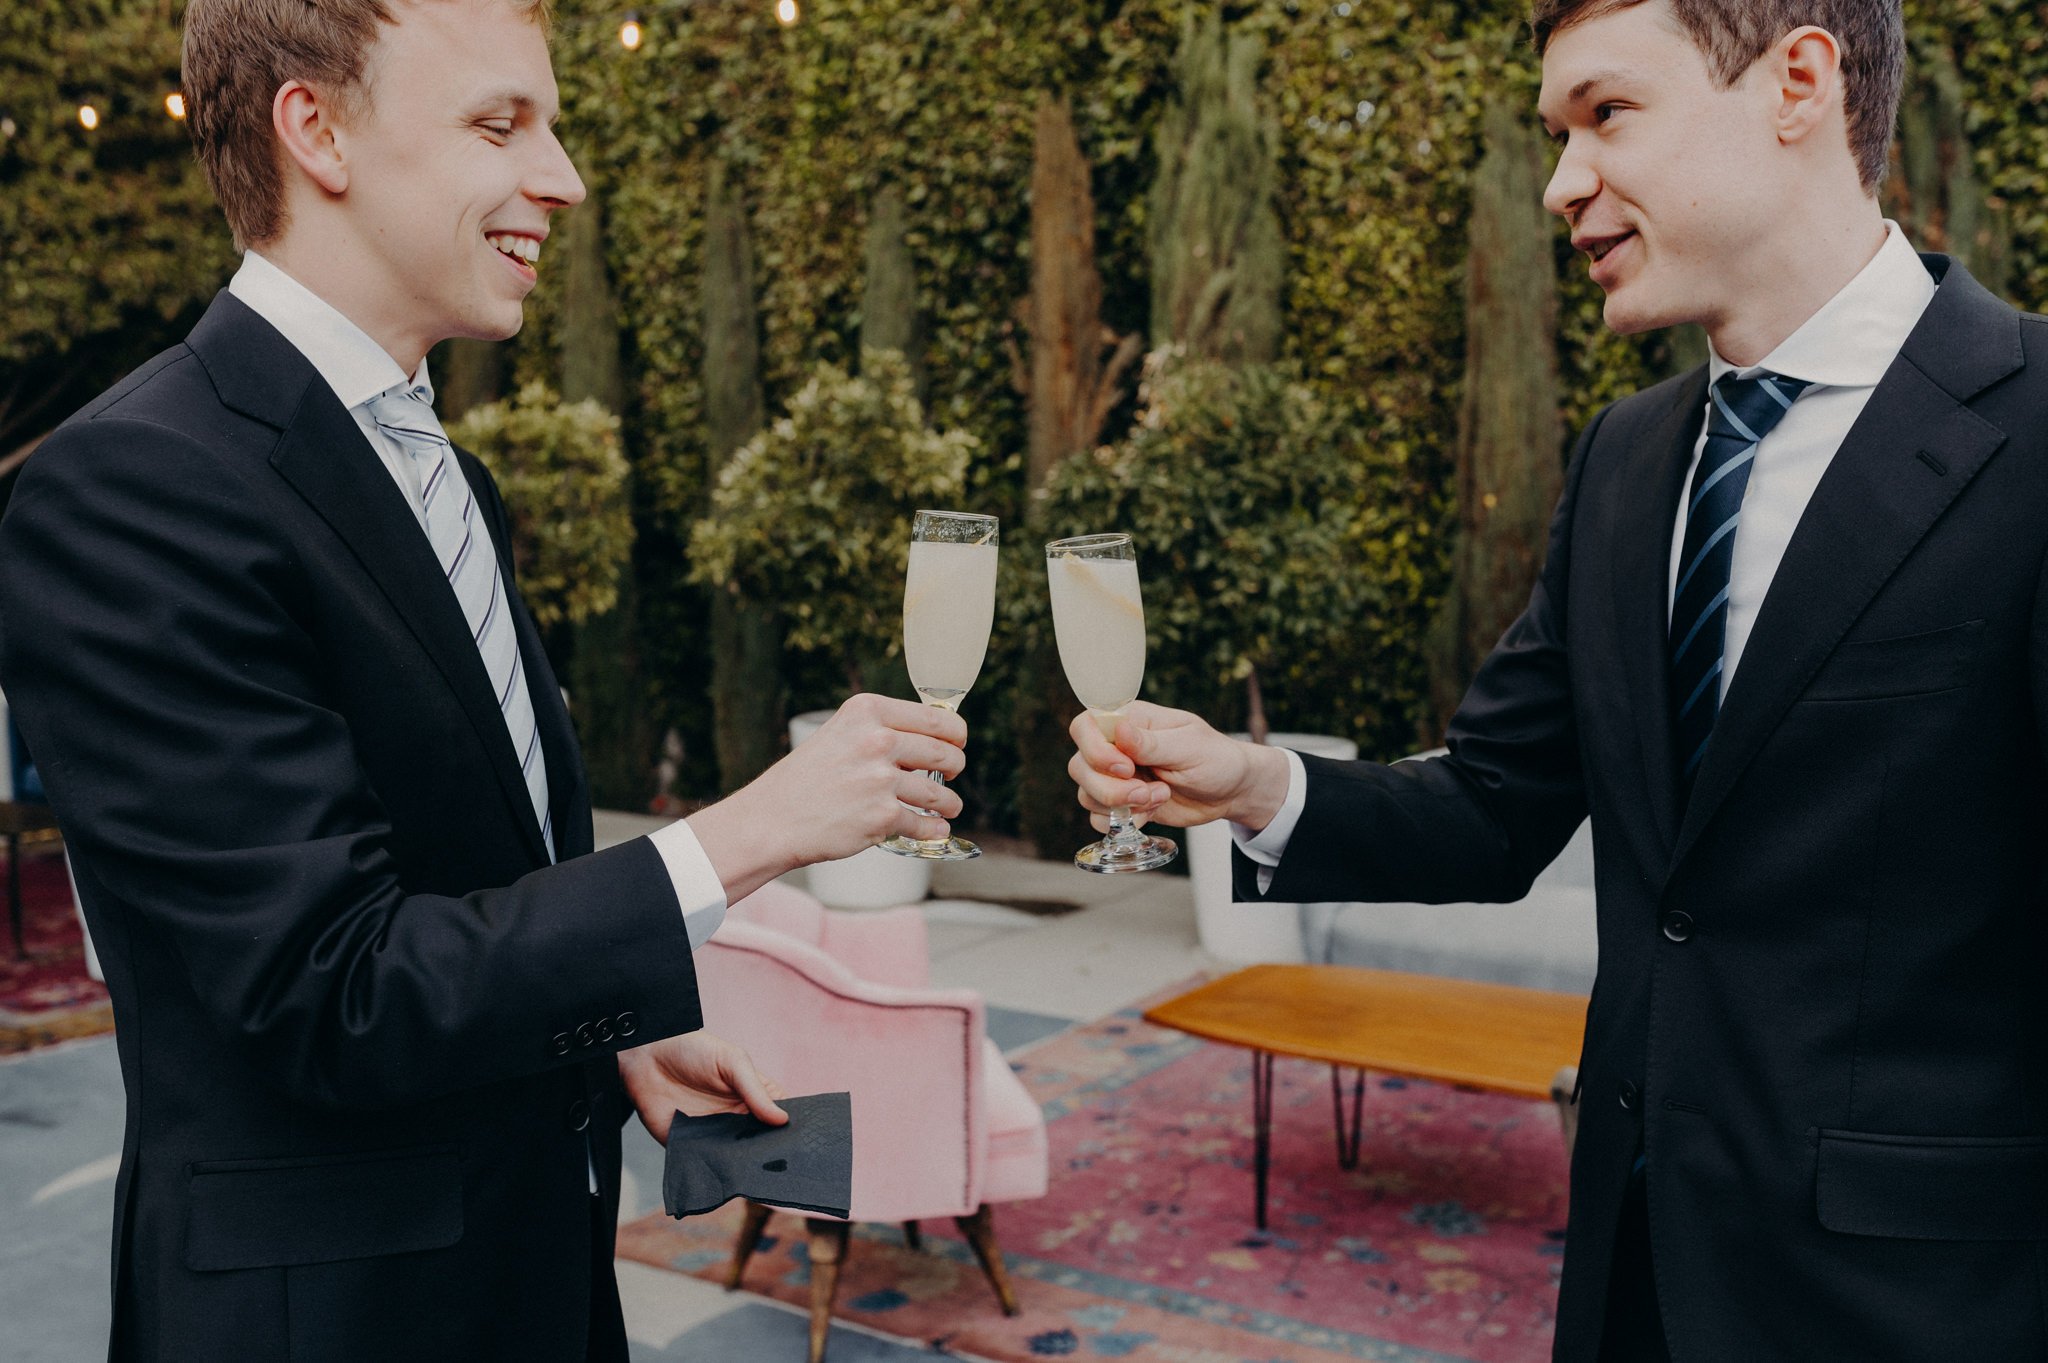 the fig house wedding - queer wedding photographers in los angeles - itlaphoto.com-84.jpg